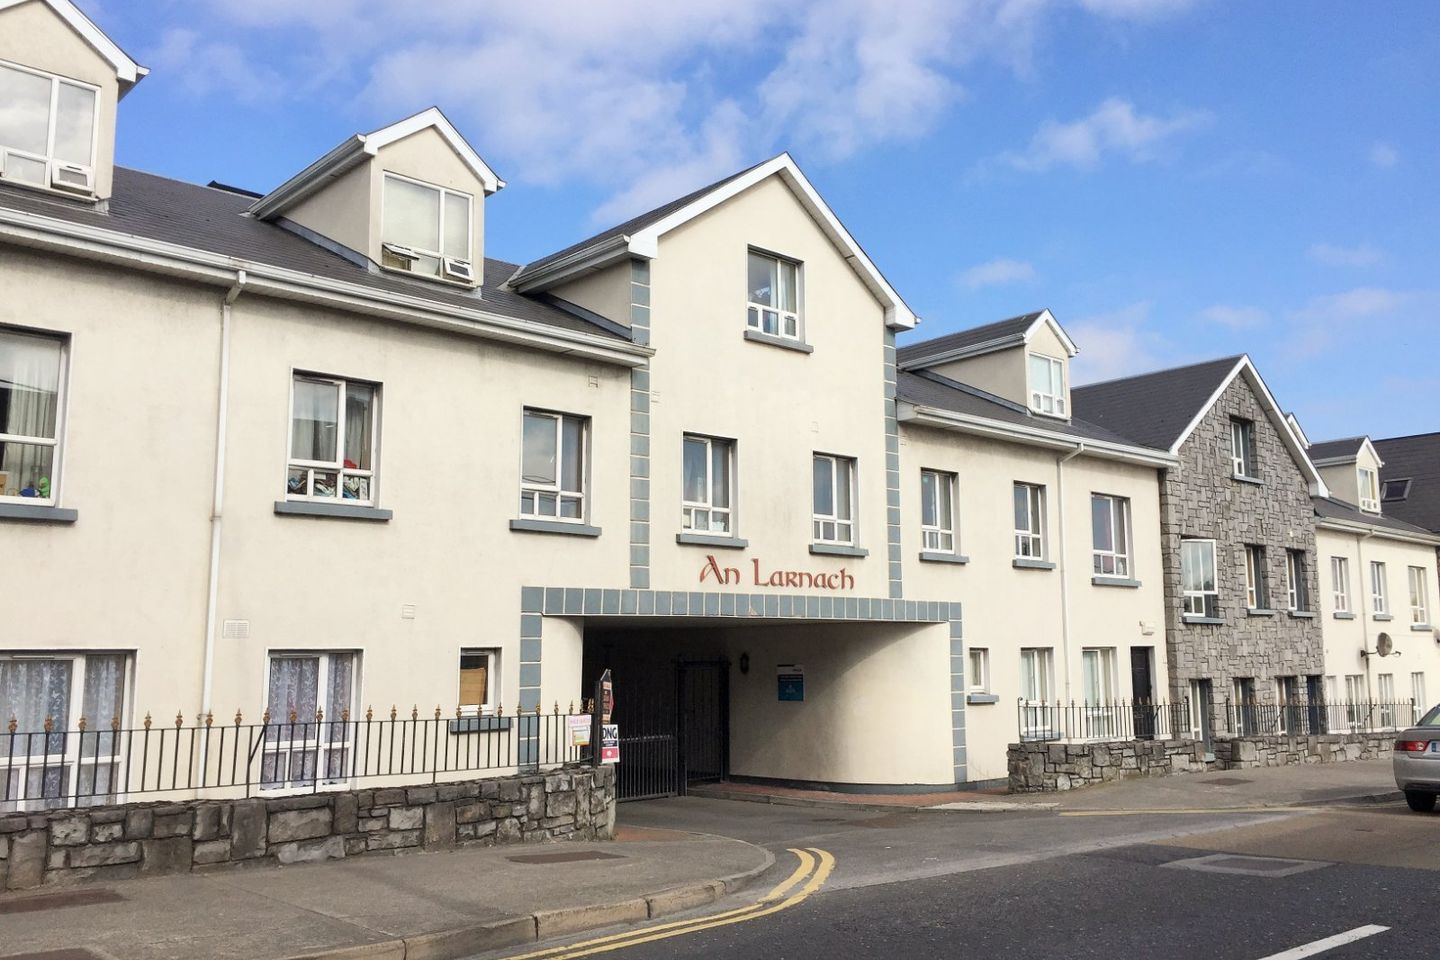 15 An Larnach, Bohermore, Galway City, Co. Galway, H91WT21